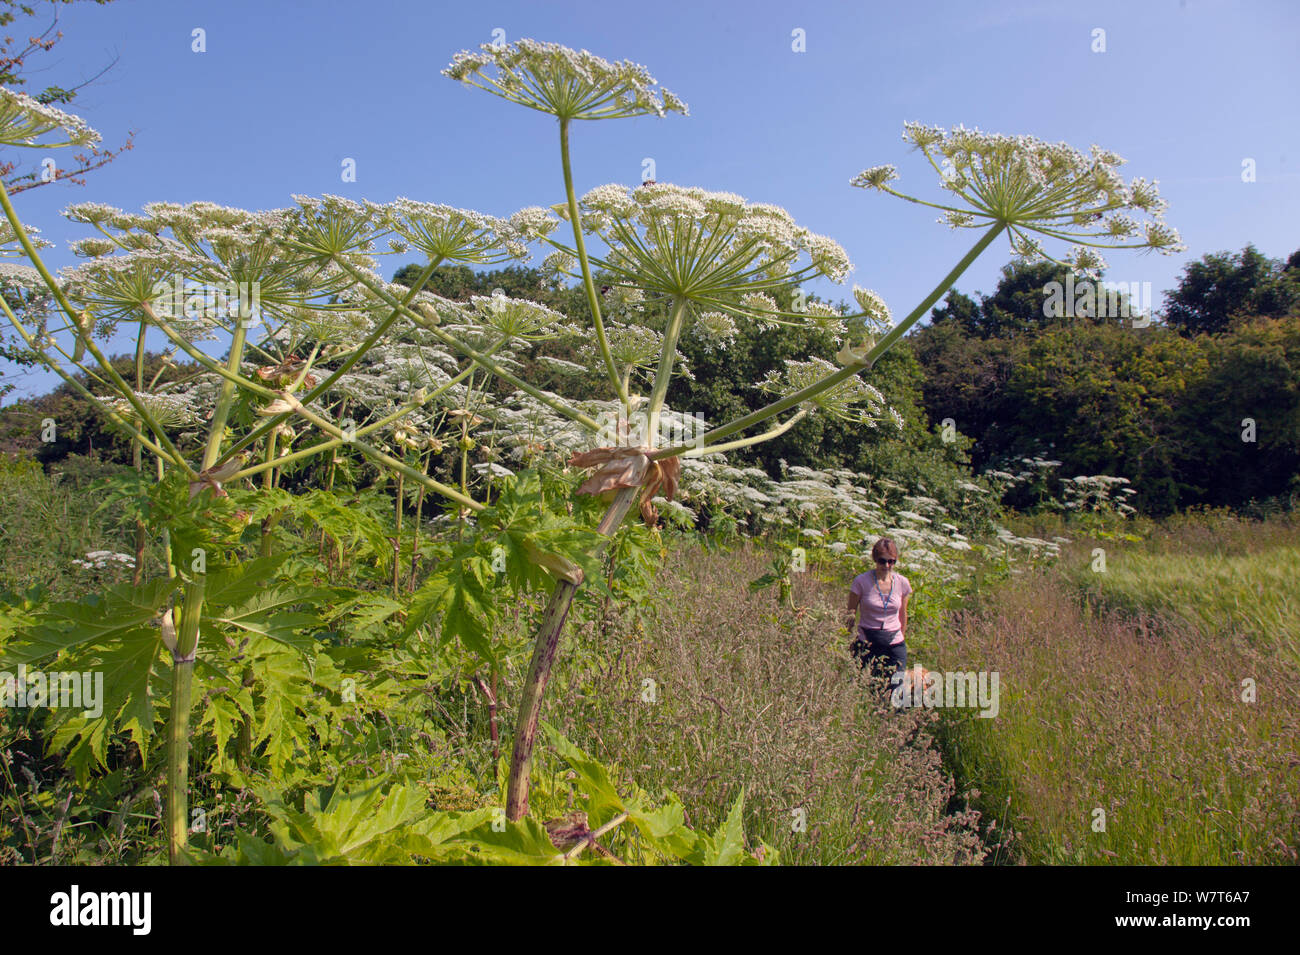 Giant Hogweed (Heraculum mantegazziamum) growing near the sea, with woman walking dog in distance, Norfolk, England, July 2013. Stock Photo